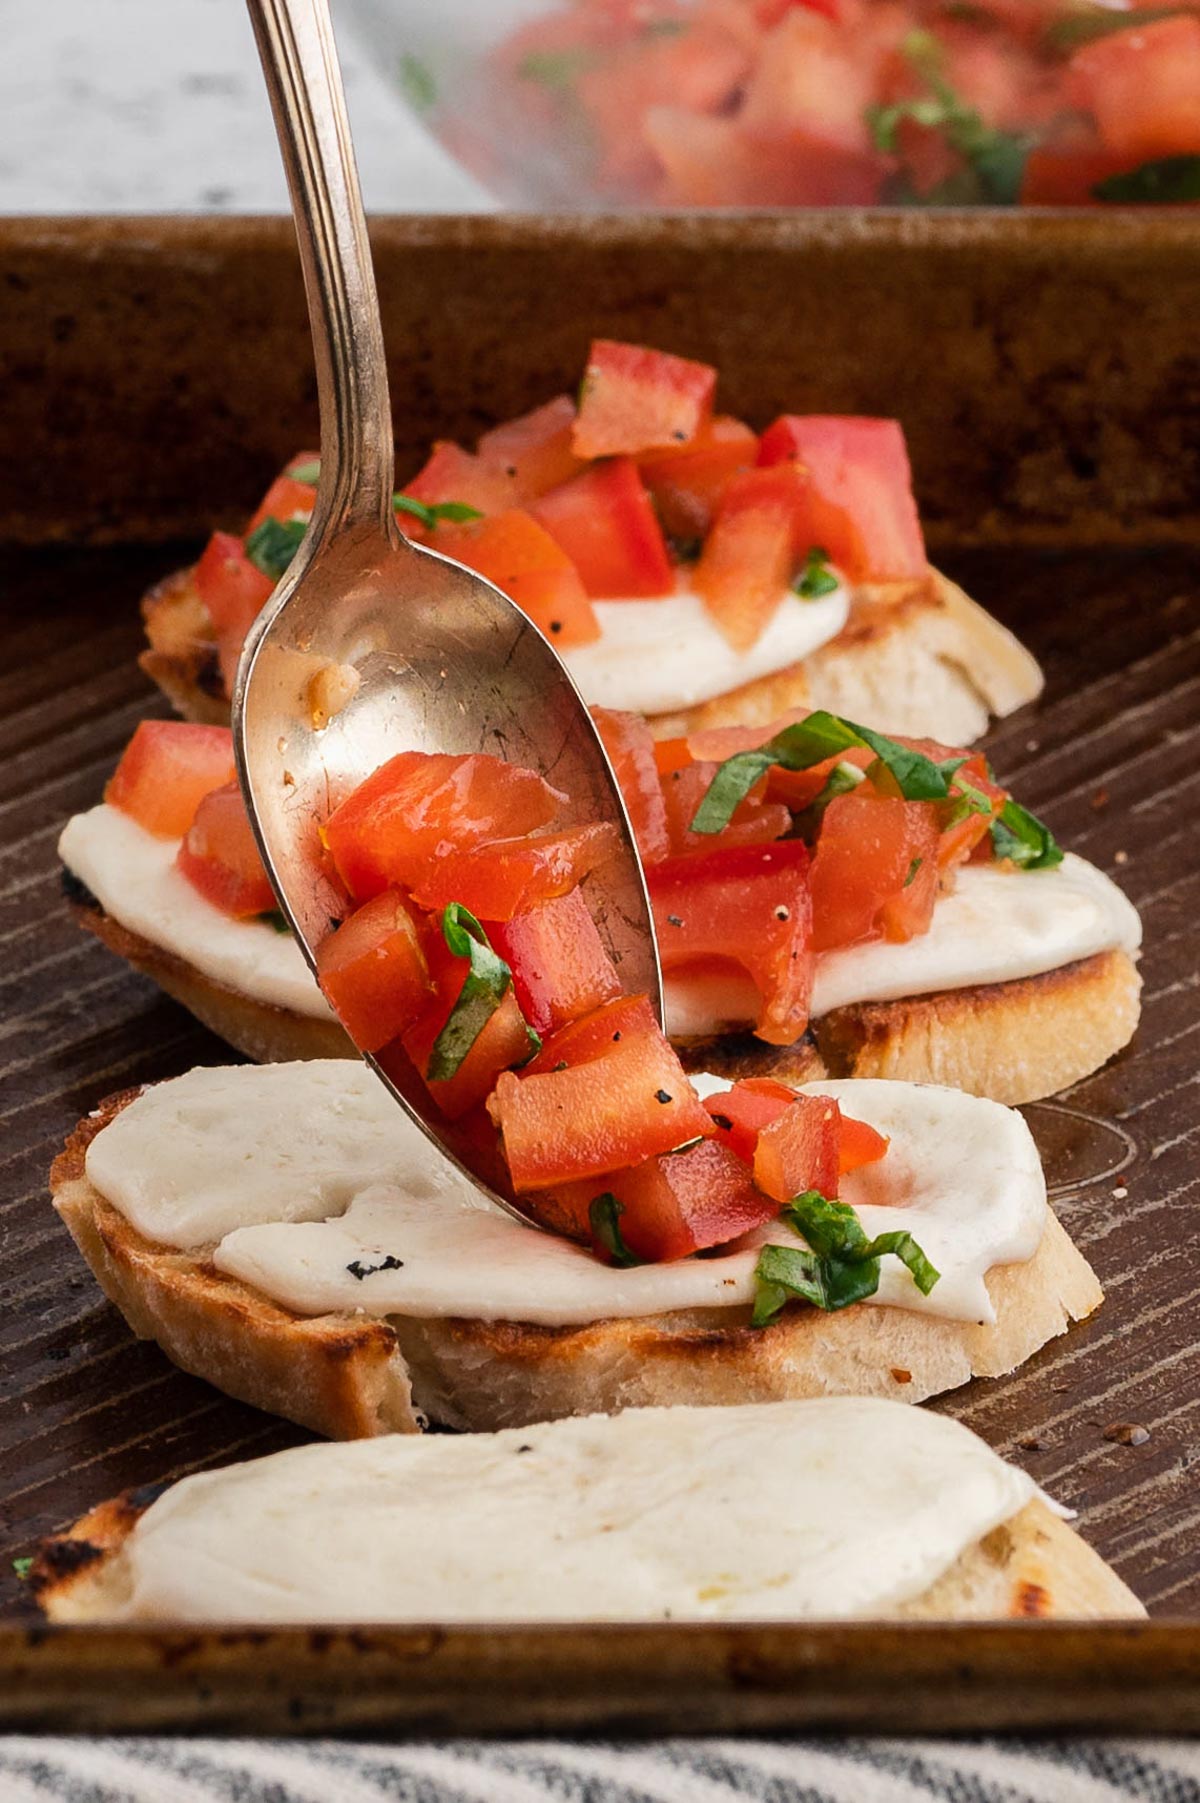 Mozarella on a piece of grilled baguetts, spooning tomato salad onto the baguette.